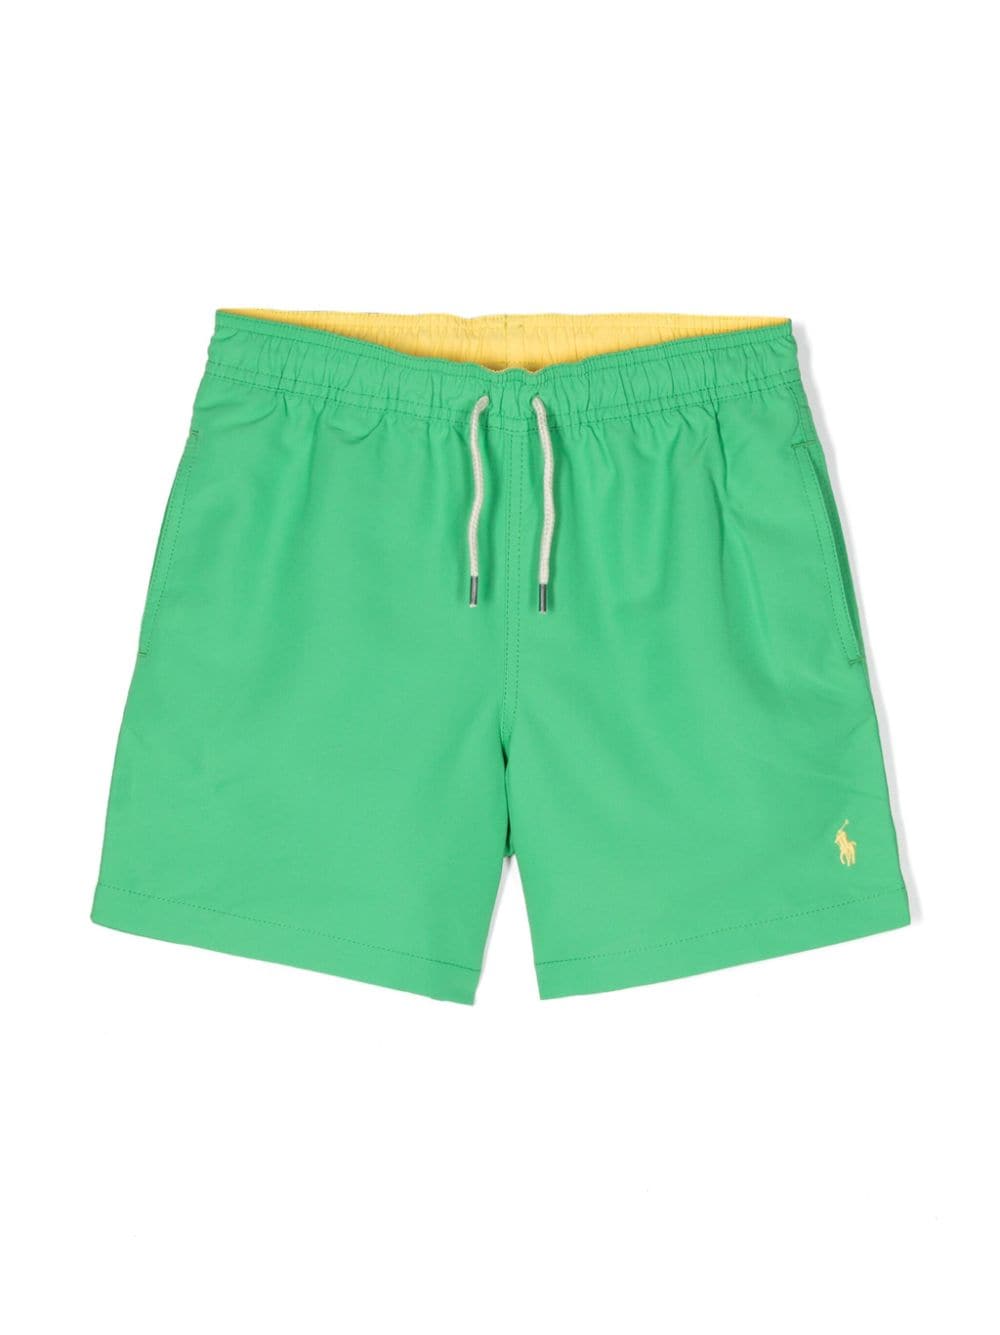 Green swimming shorts for boys